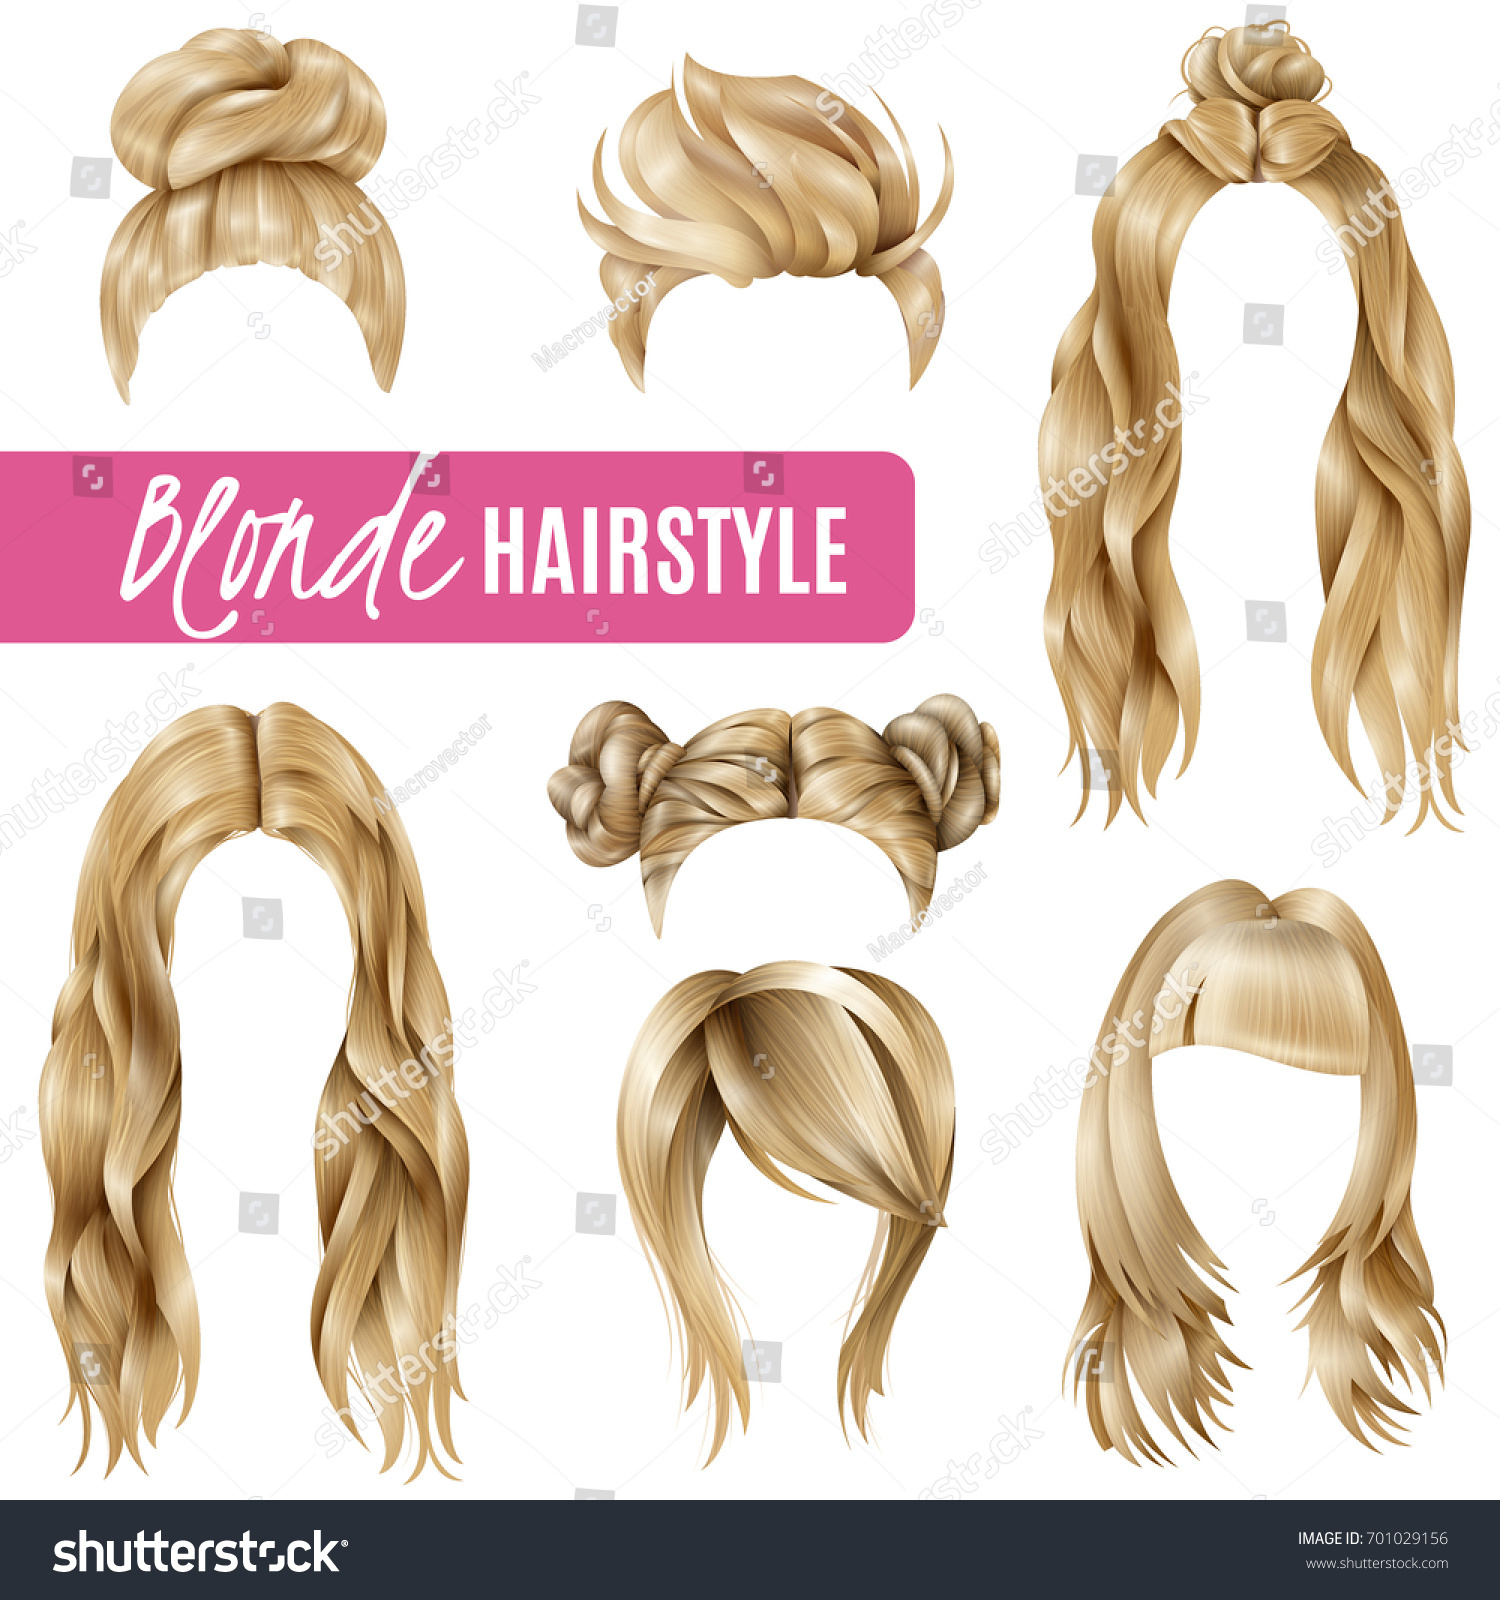 Set of coiffures for blond women with stylish haircuts and long hair, braided strands isolated vector illustration  #701029156